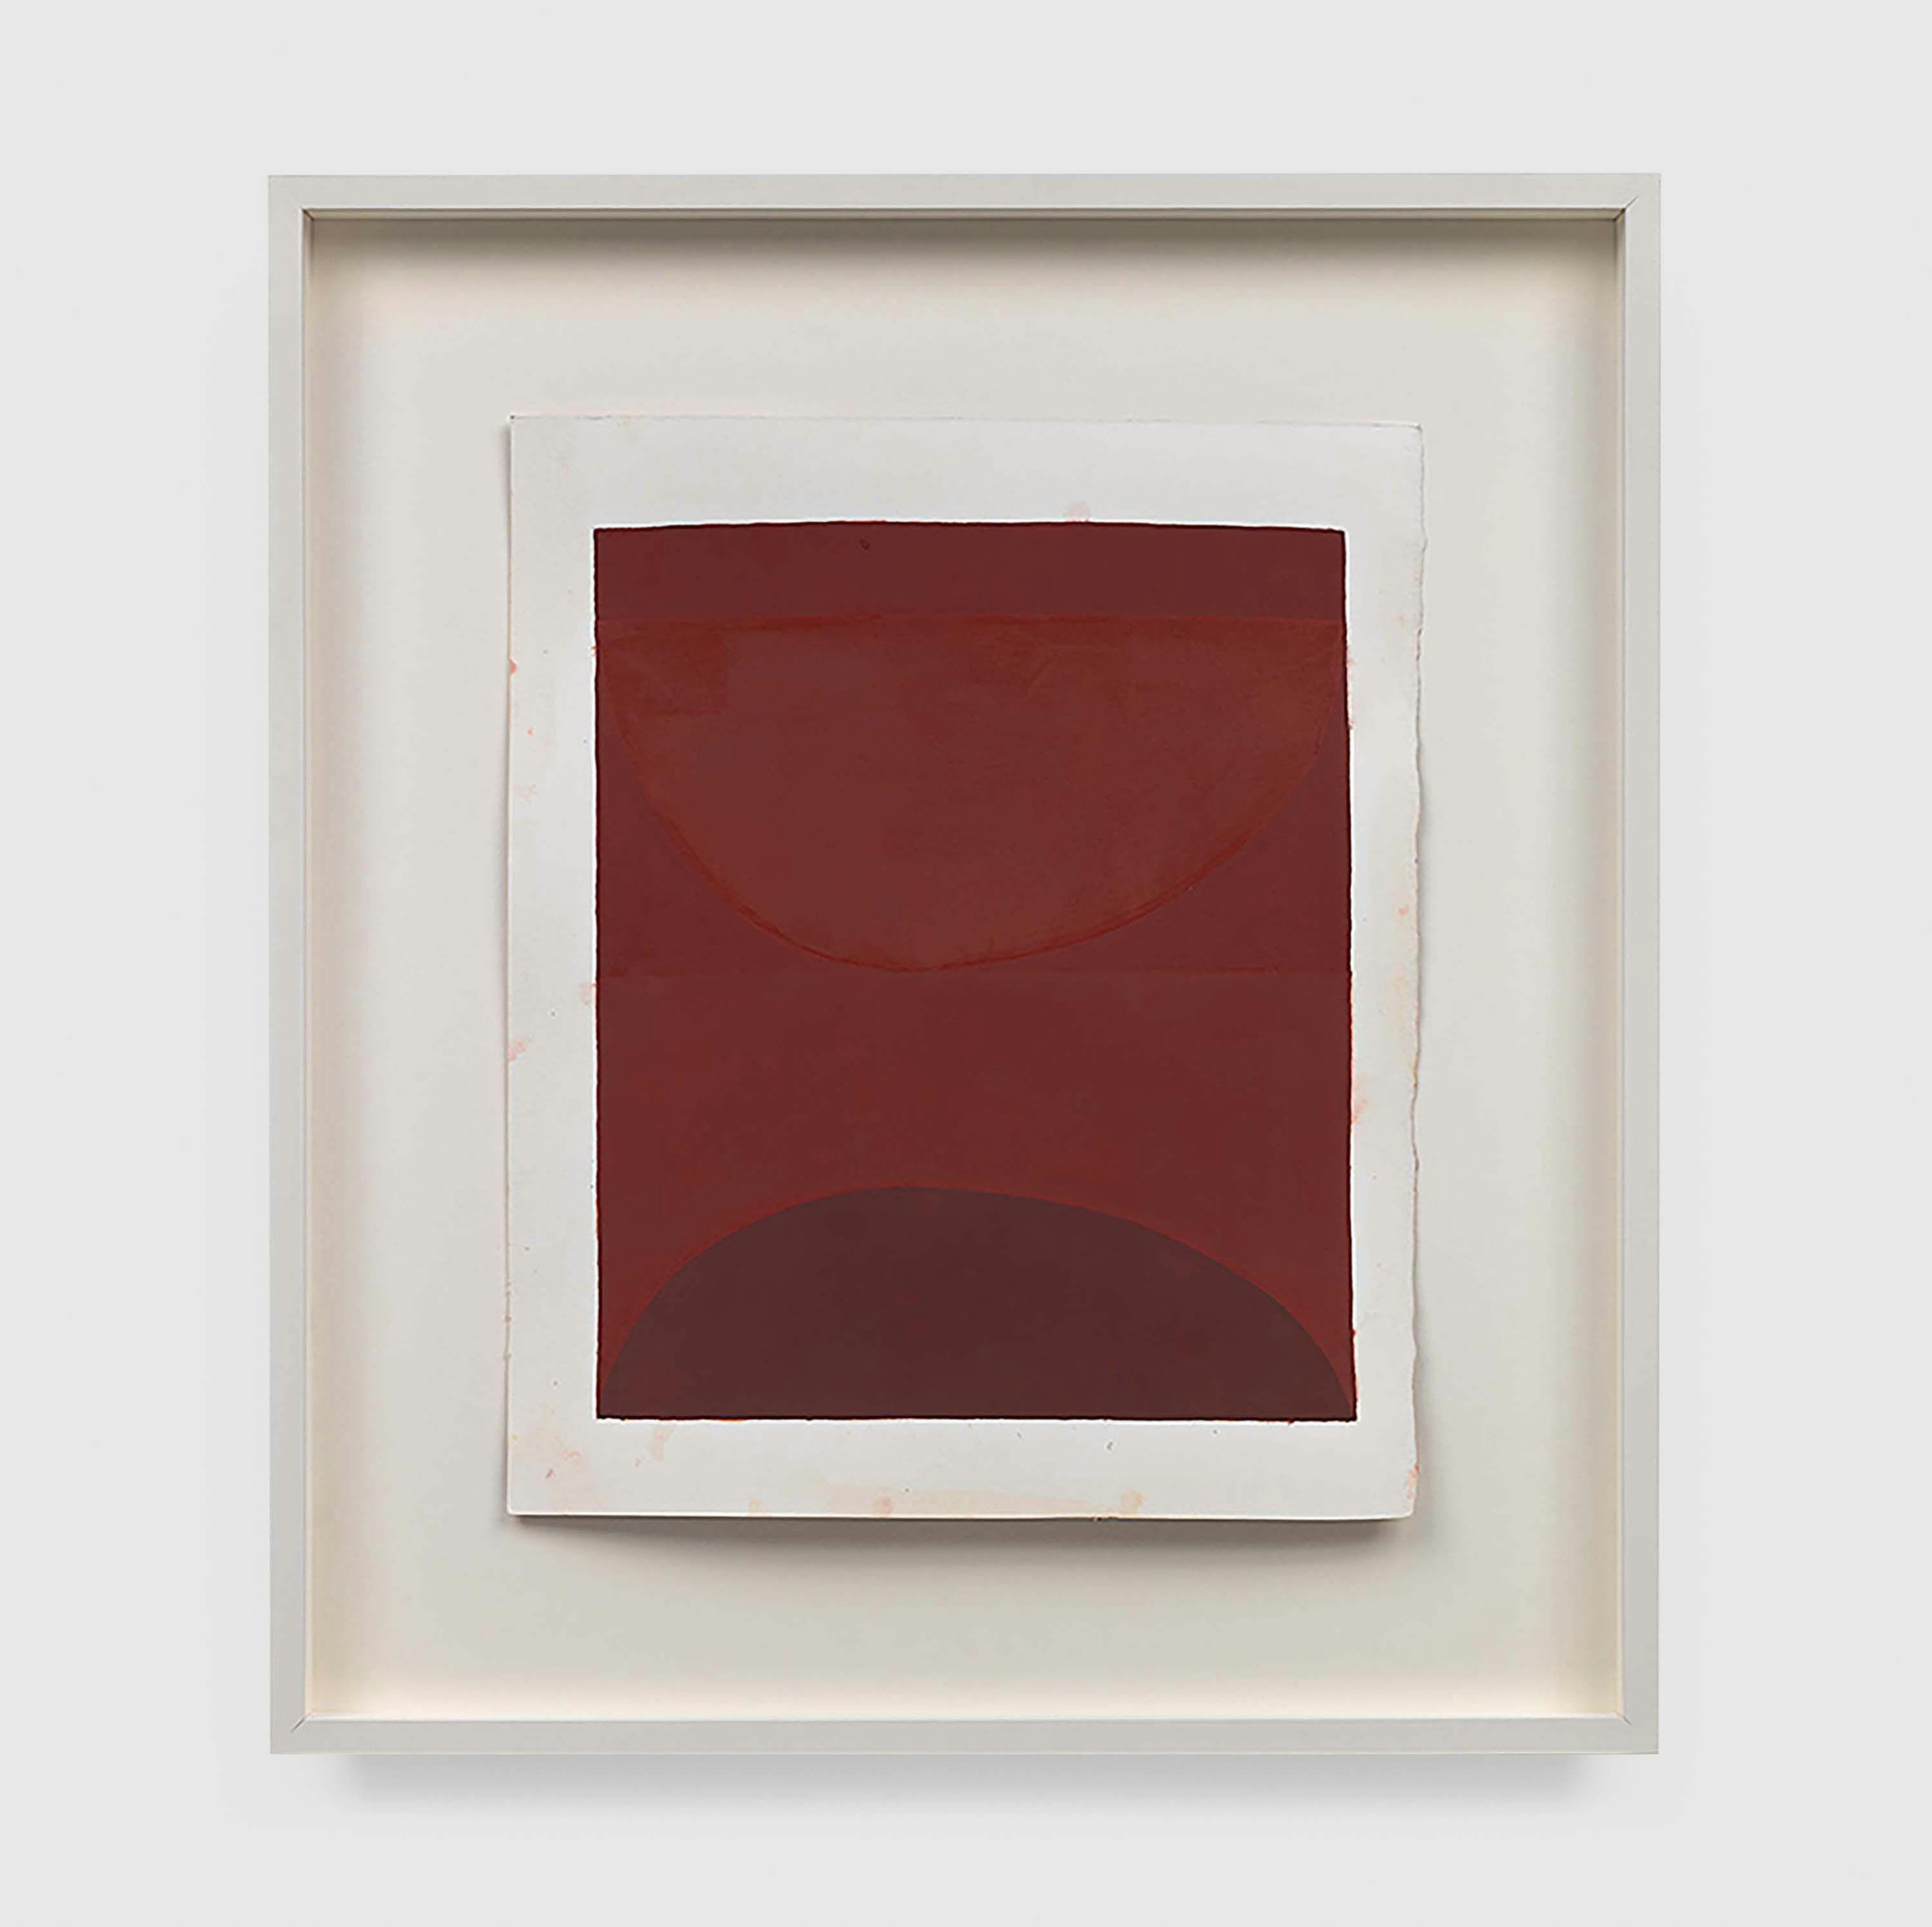 A work on paper by Suzan Frecon, titled embodiment of red, after DUST, dated 2013.